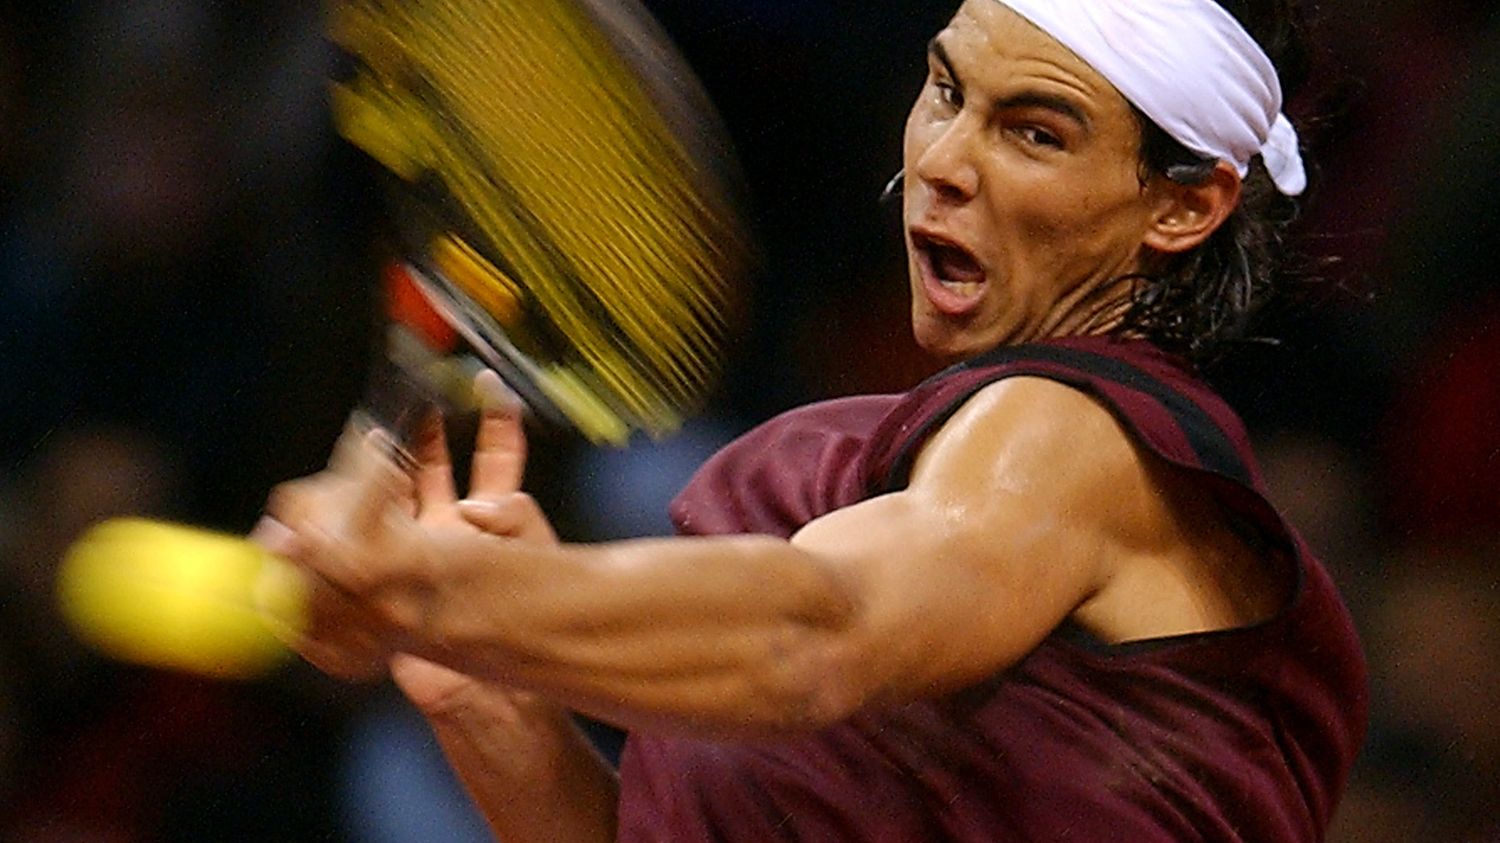 Rafael Nadal's first exploits took place 20 years ago: his first French opponents speak of "his desire to destroy the ball"